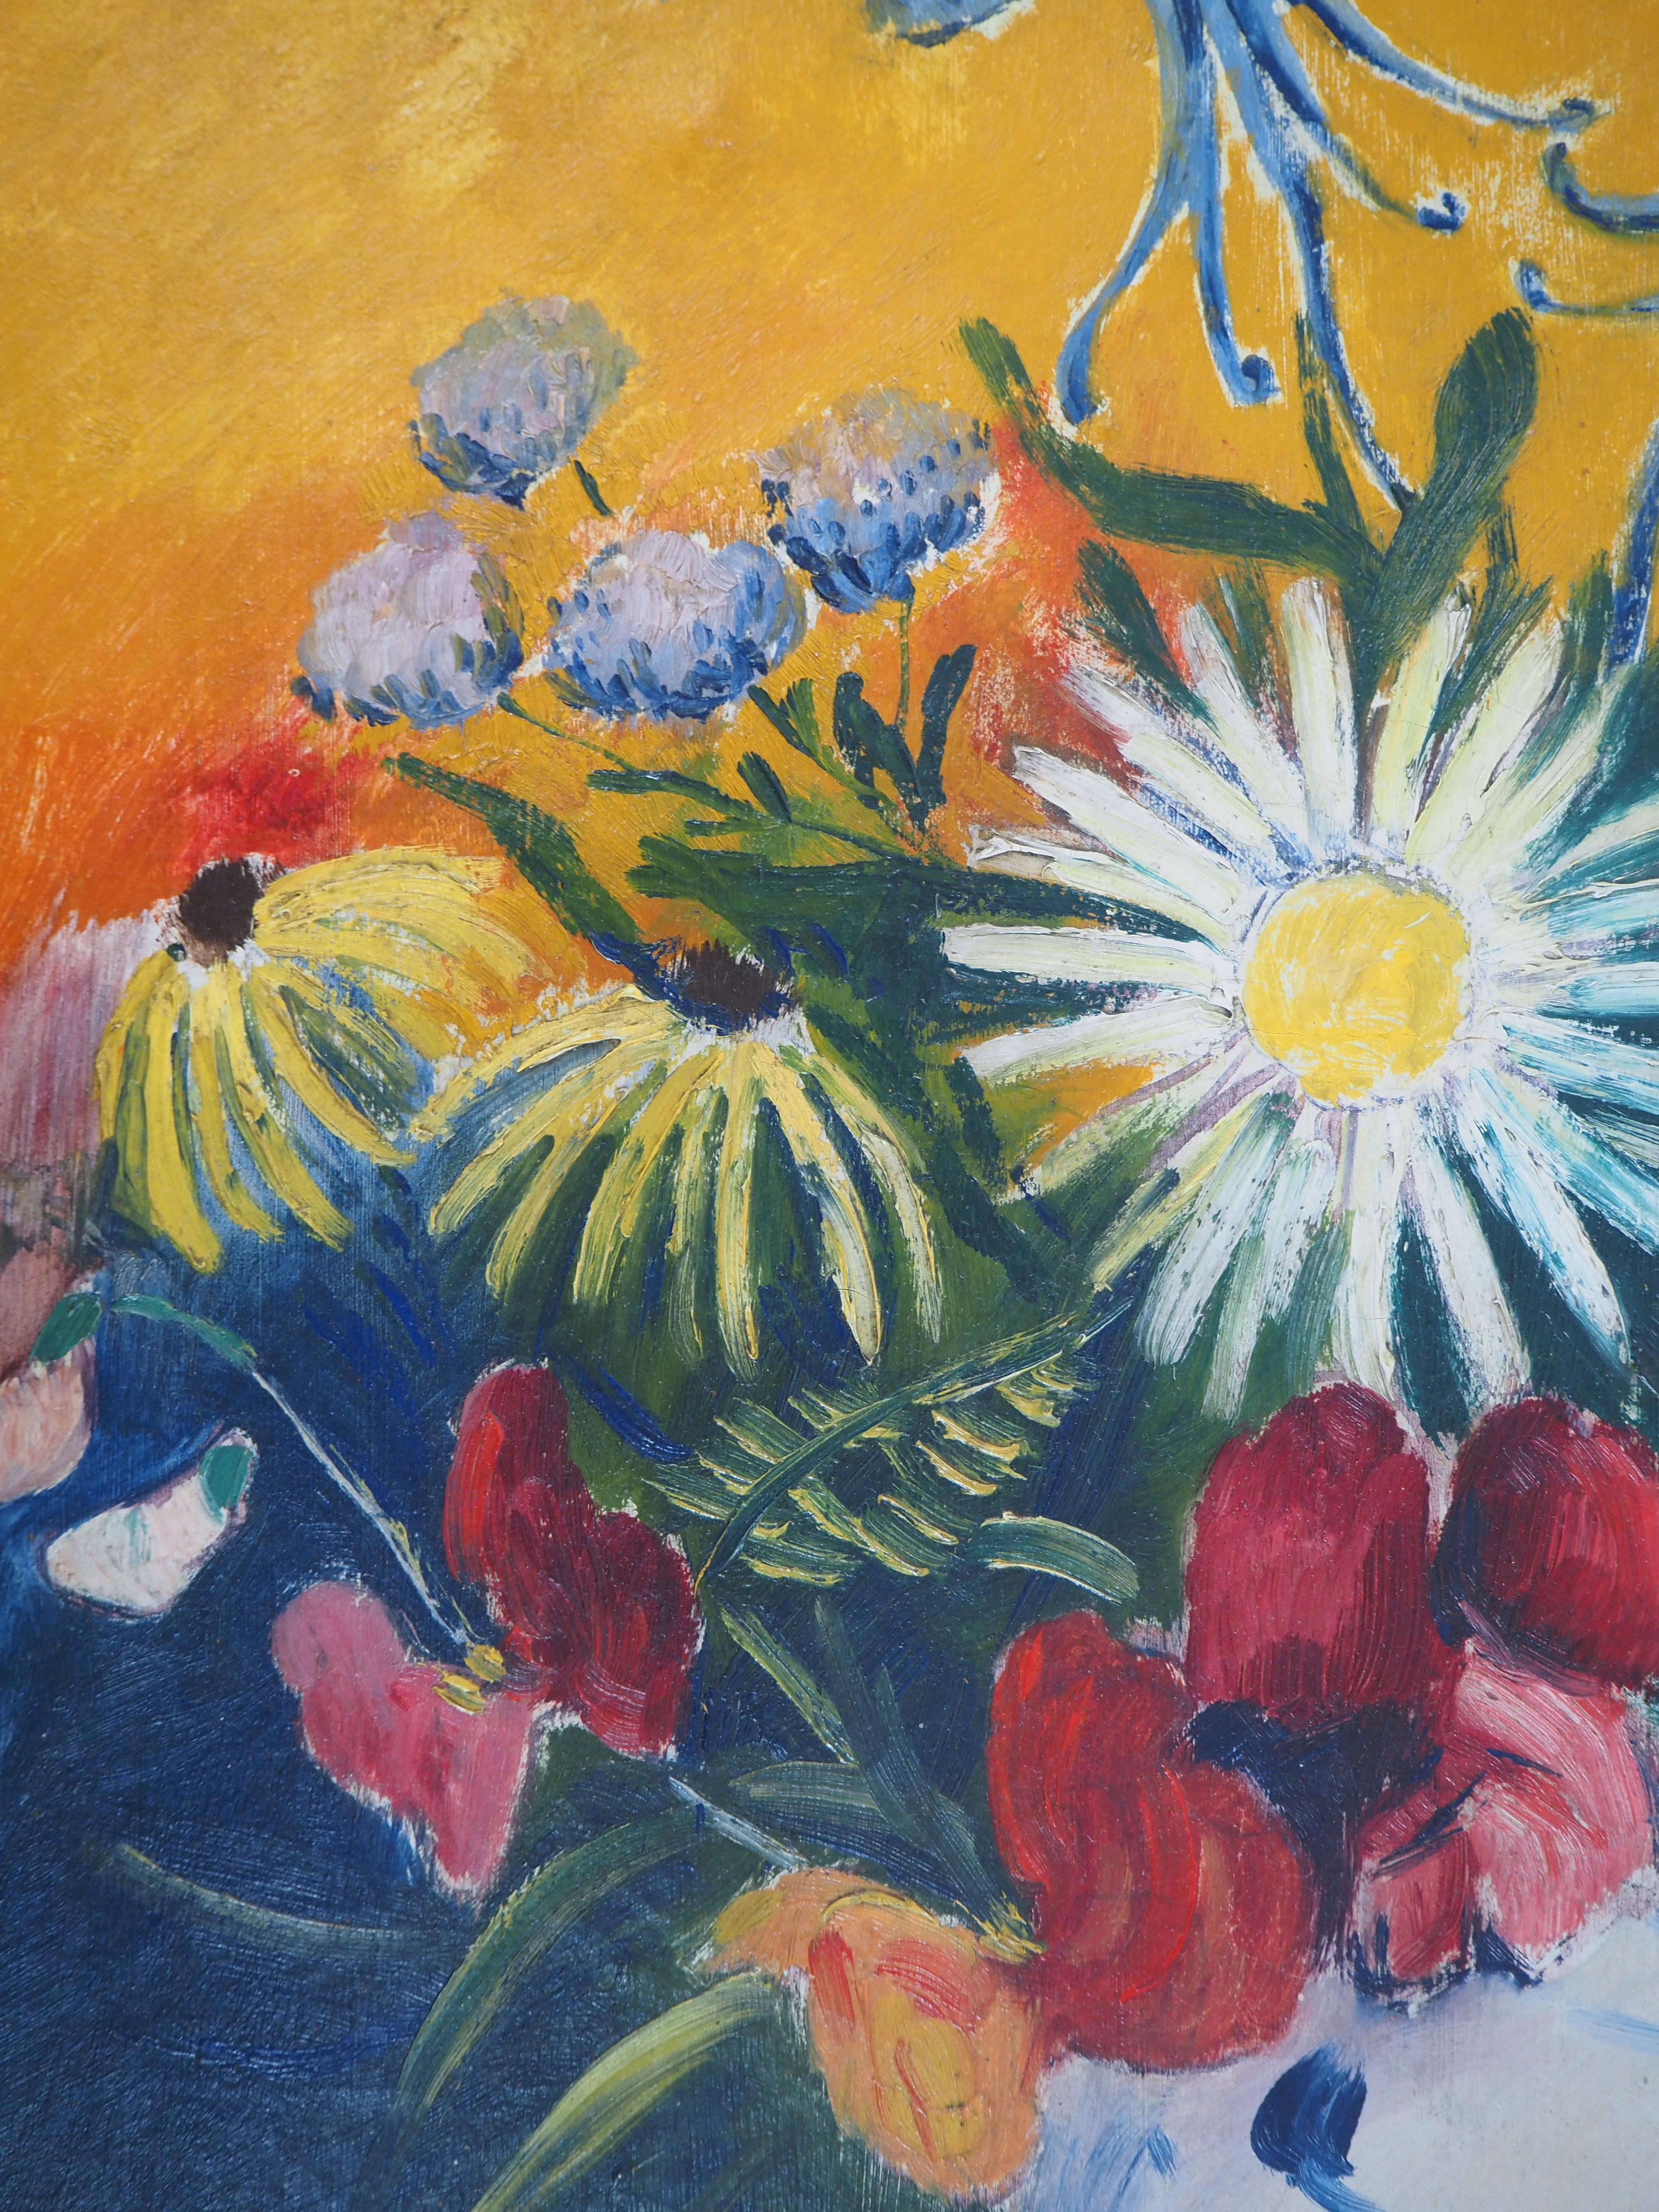 Tribute to Van Gogh : Flowers on Yellow Background - Oil on canvas - Signed - Post-Impressionist Painting by Elisée Maclet